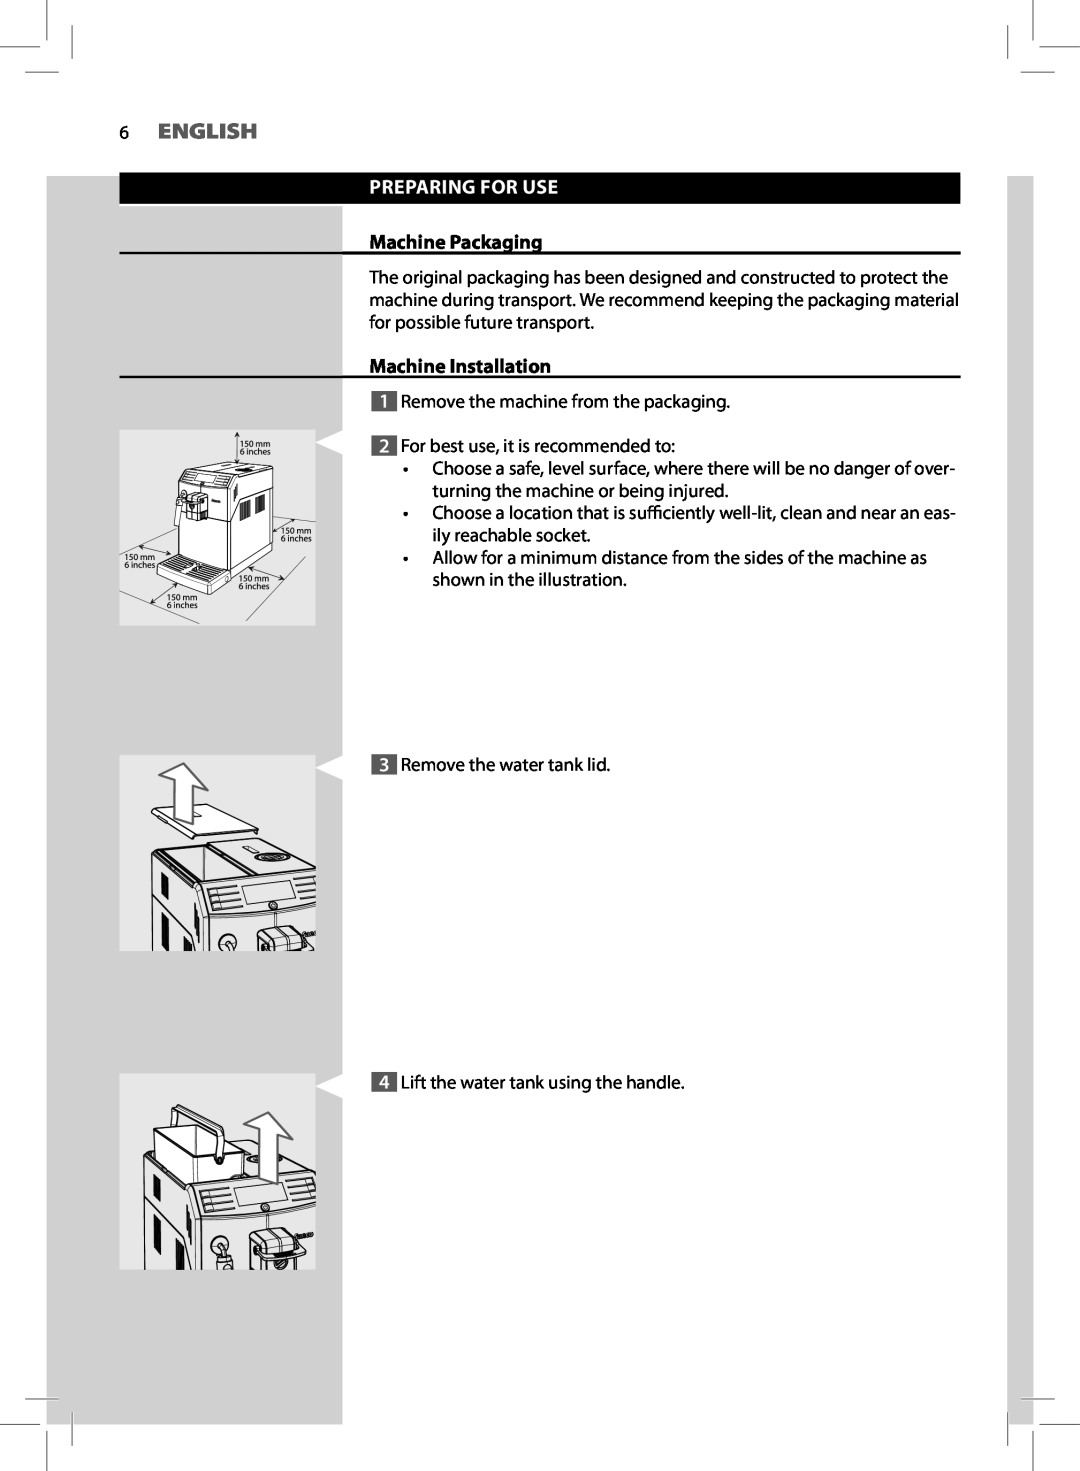 Saeco Coffee Makers HD8775 user manual 6ENGLISH, Preparing For Use, Machine Packaging, Machine Installation 